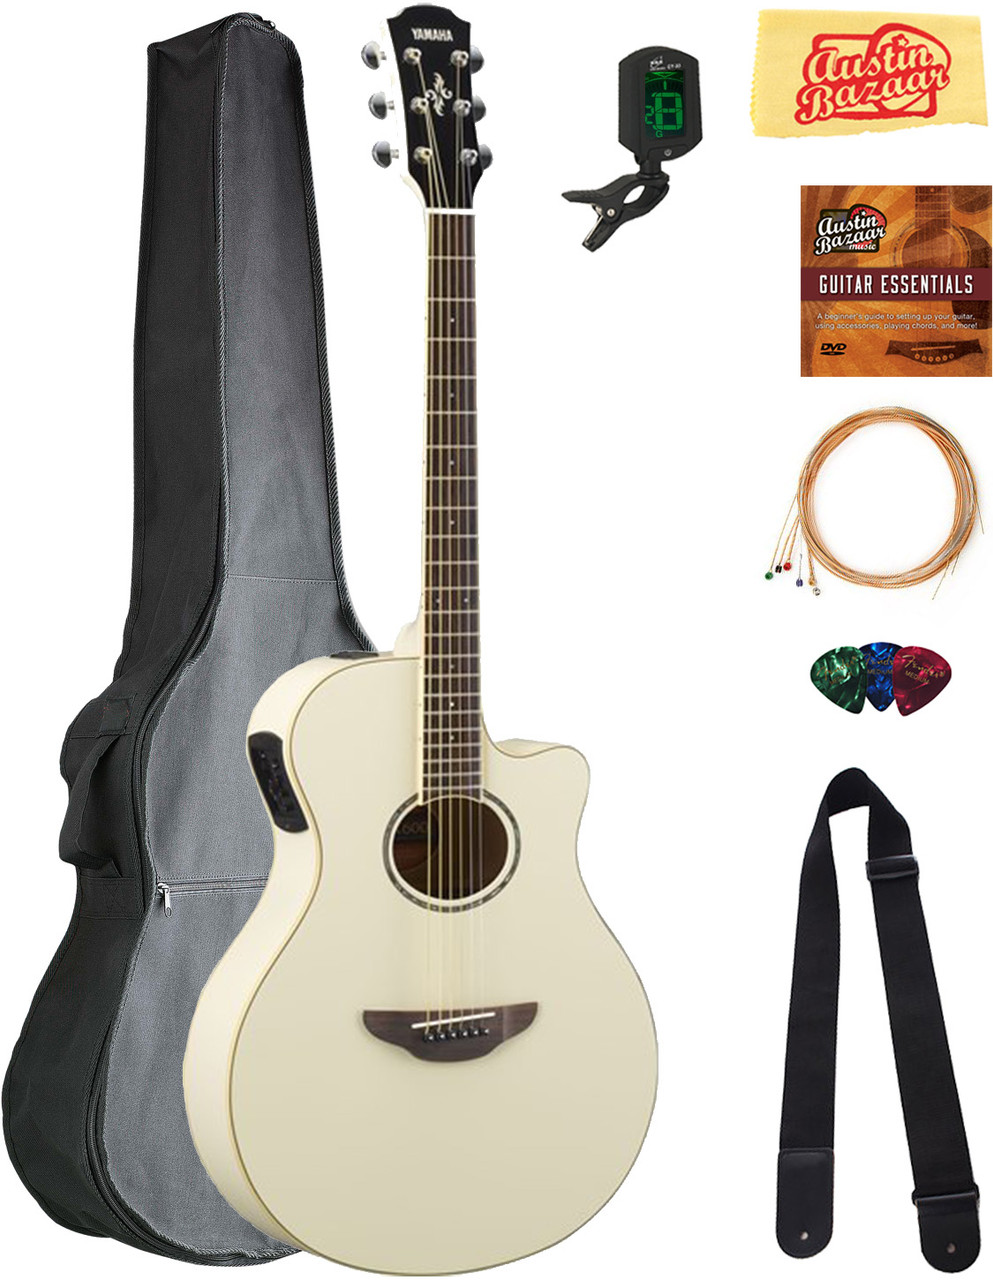 Yamaha APX600 Thin Body Acoustic-Electric Guitar - Natural w/ Gig Bag